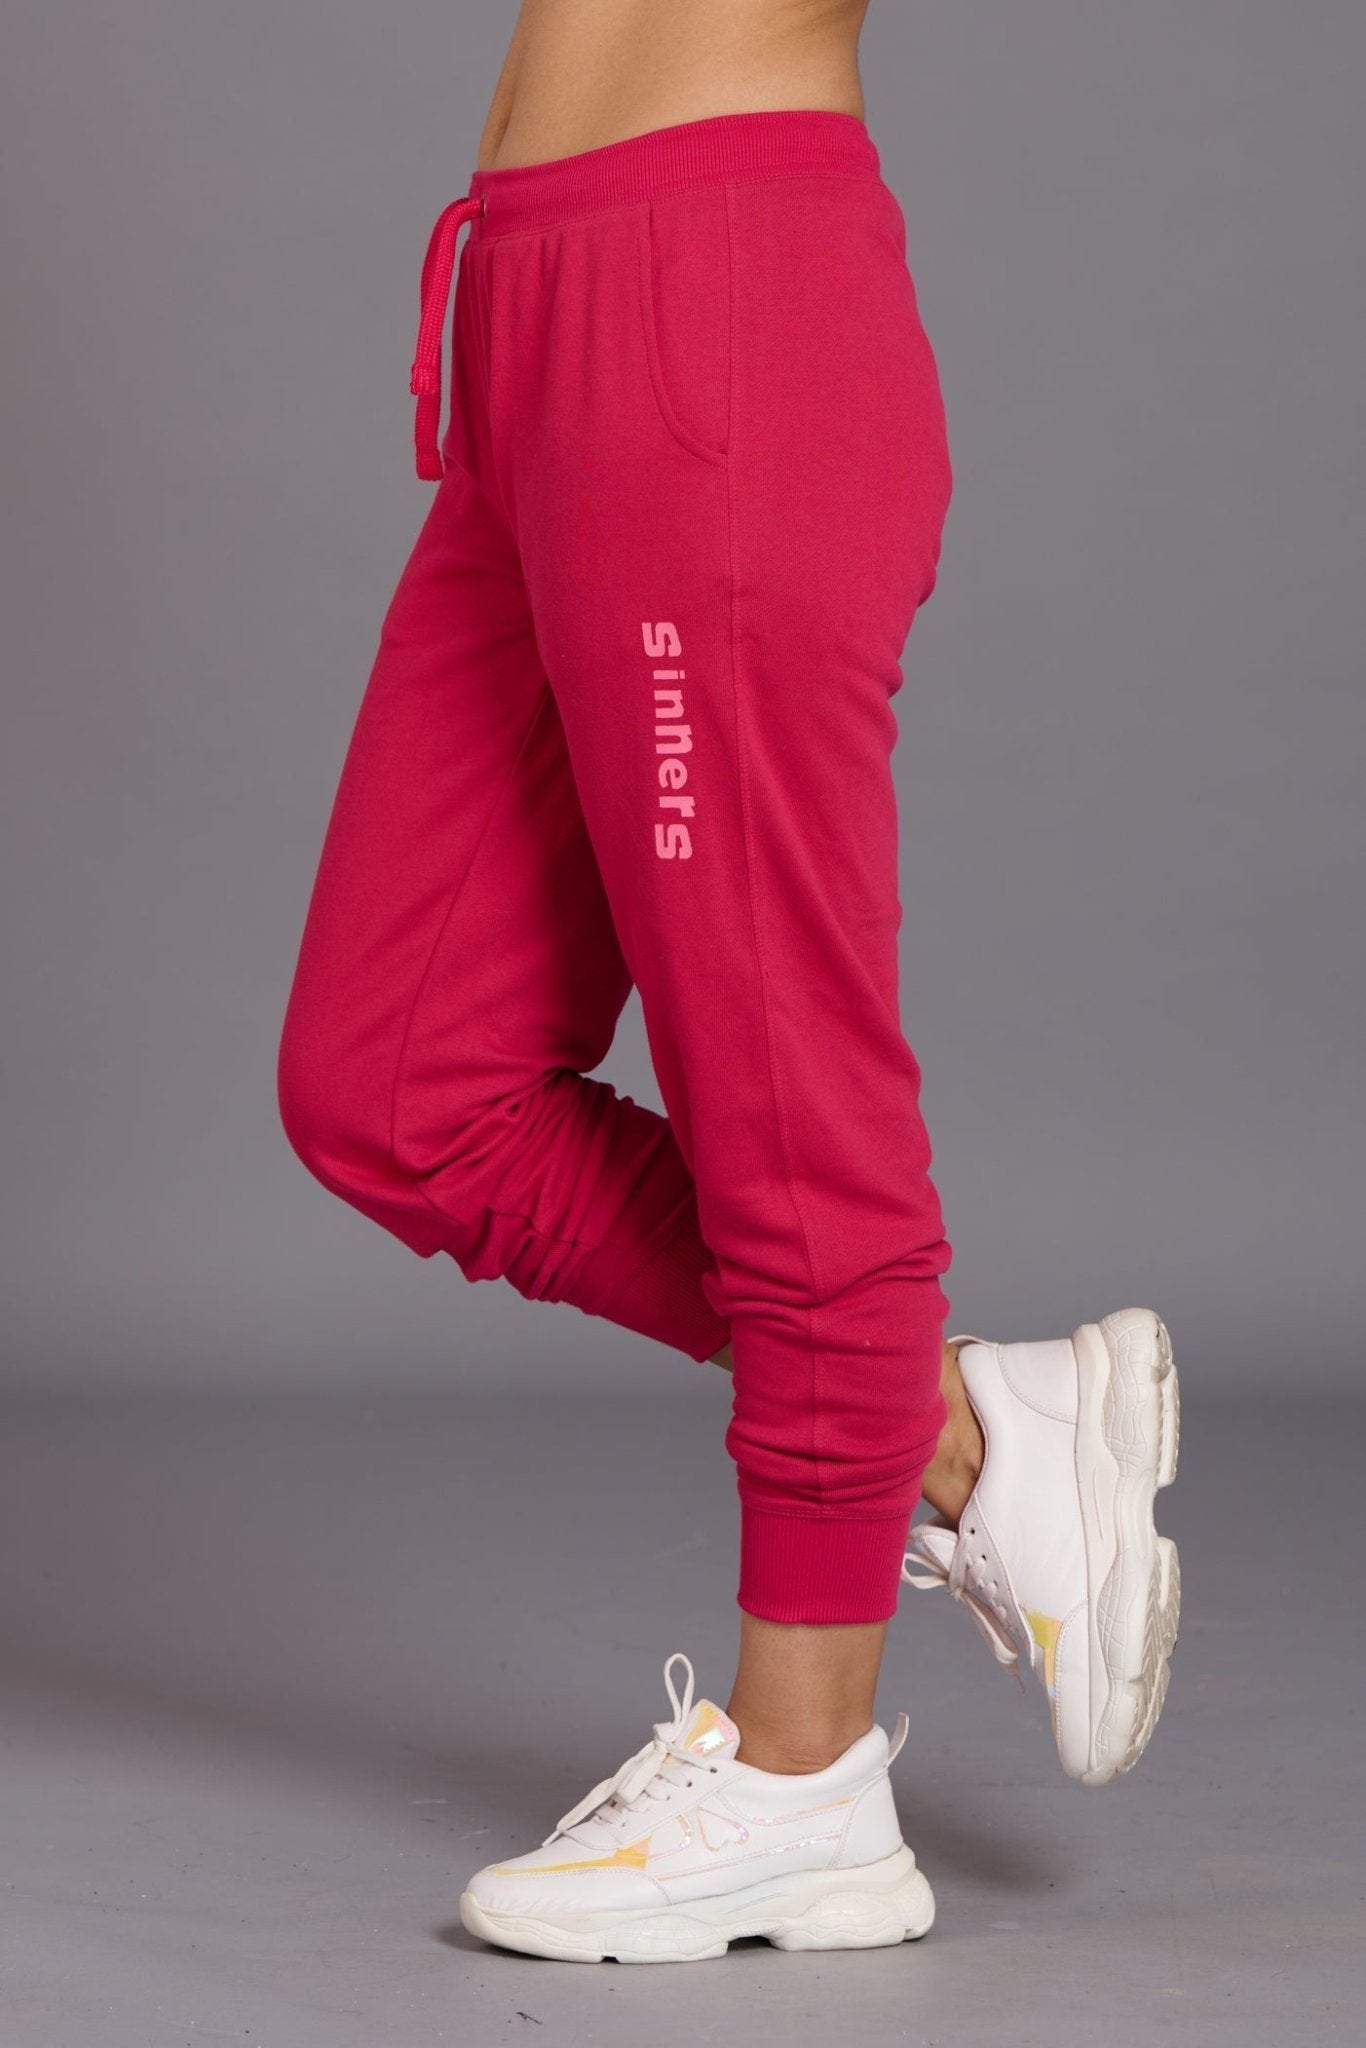 Sinner Printed Pink Cotton Joggers for Women - Go Devil